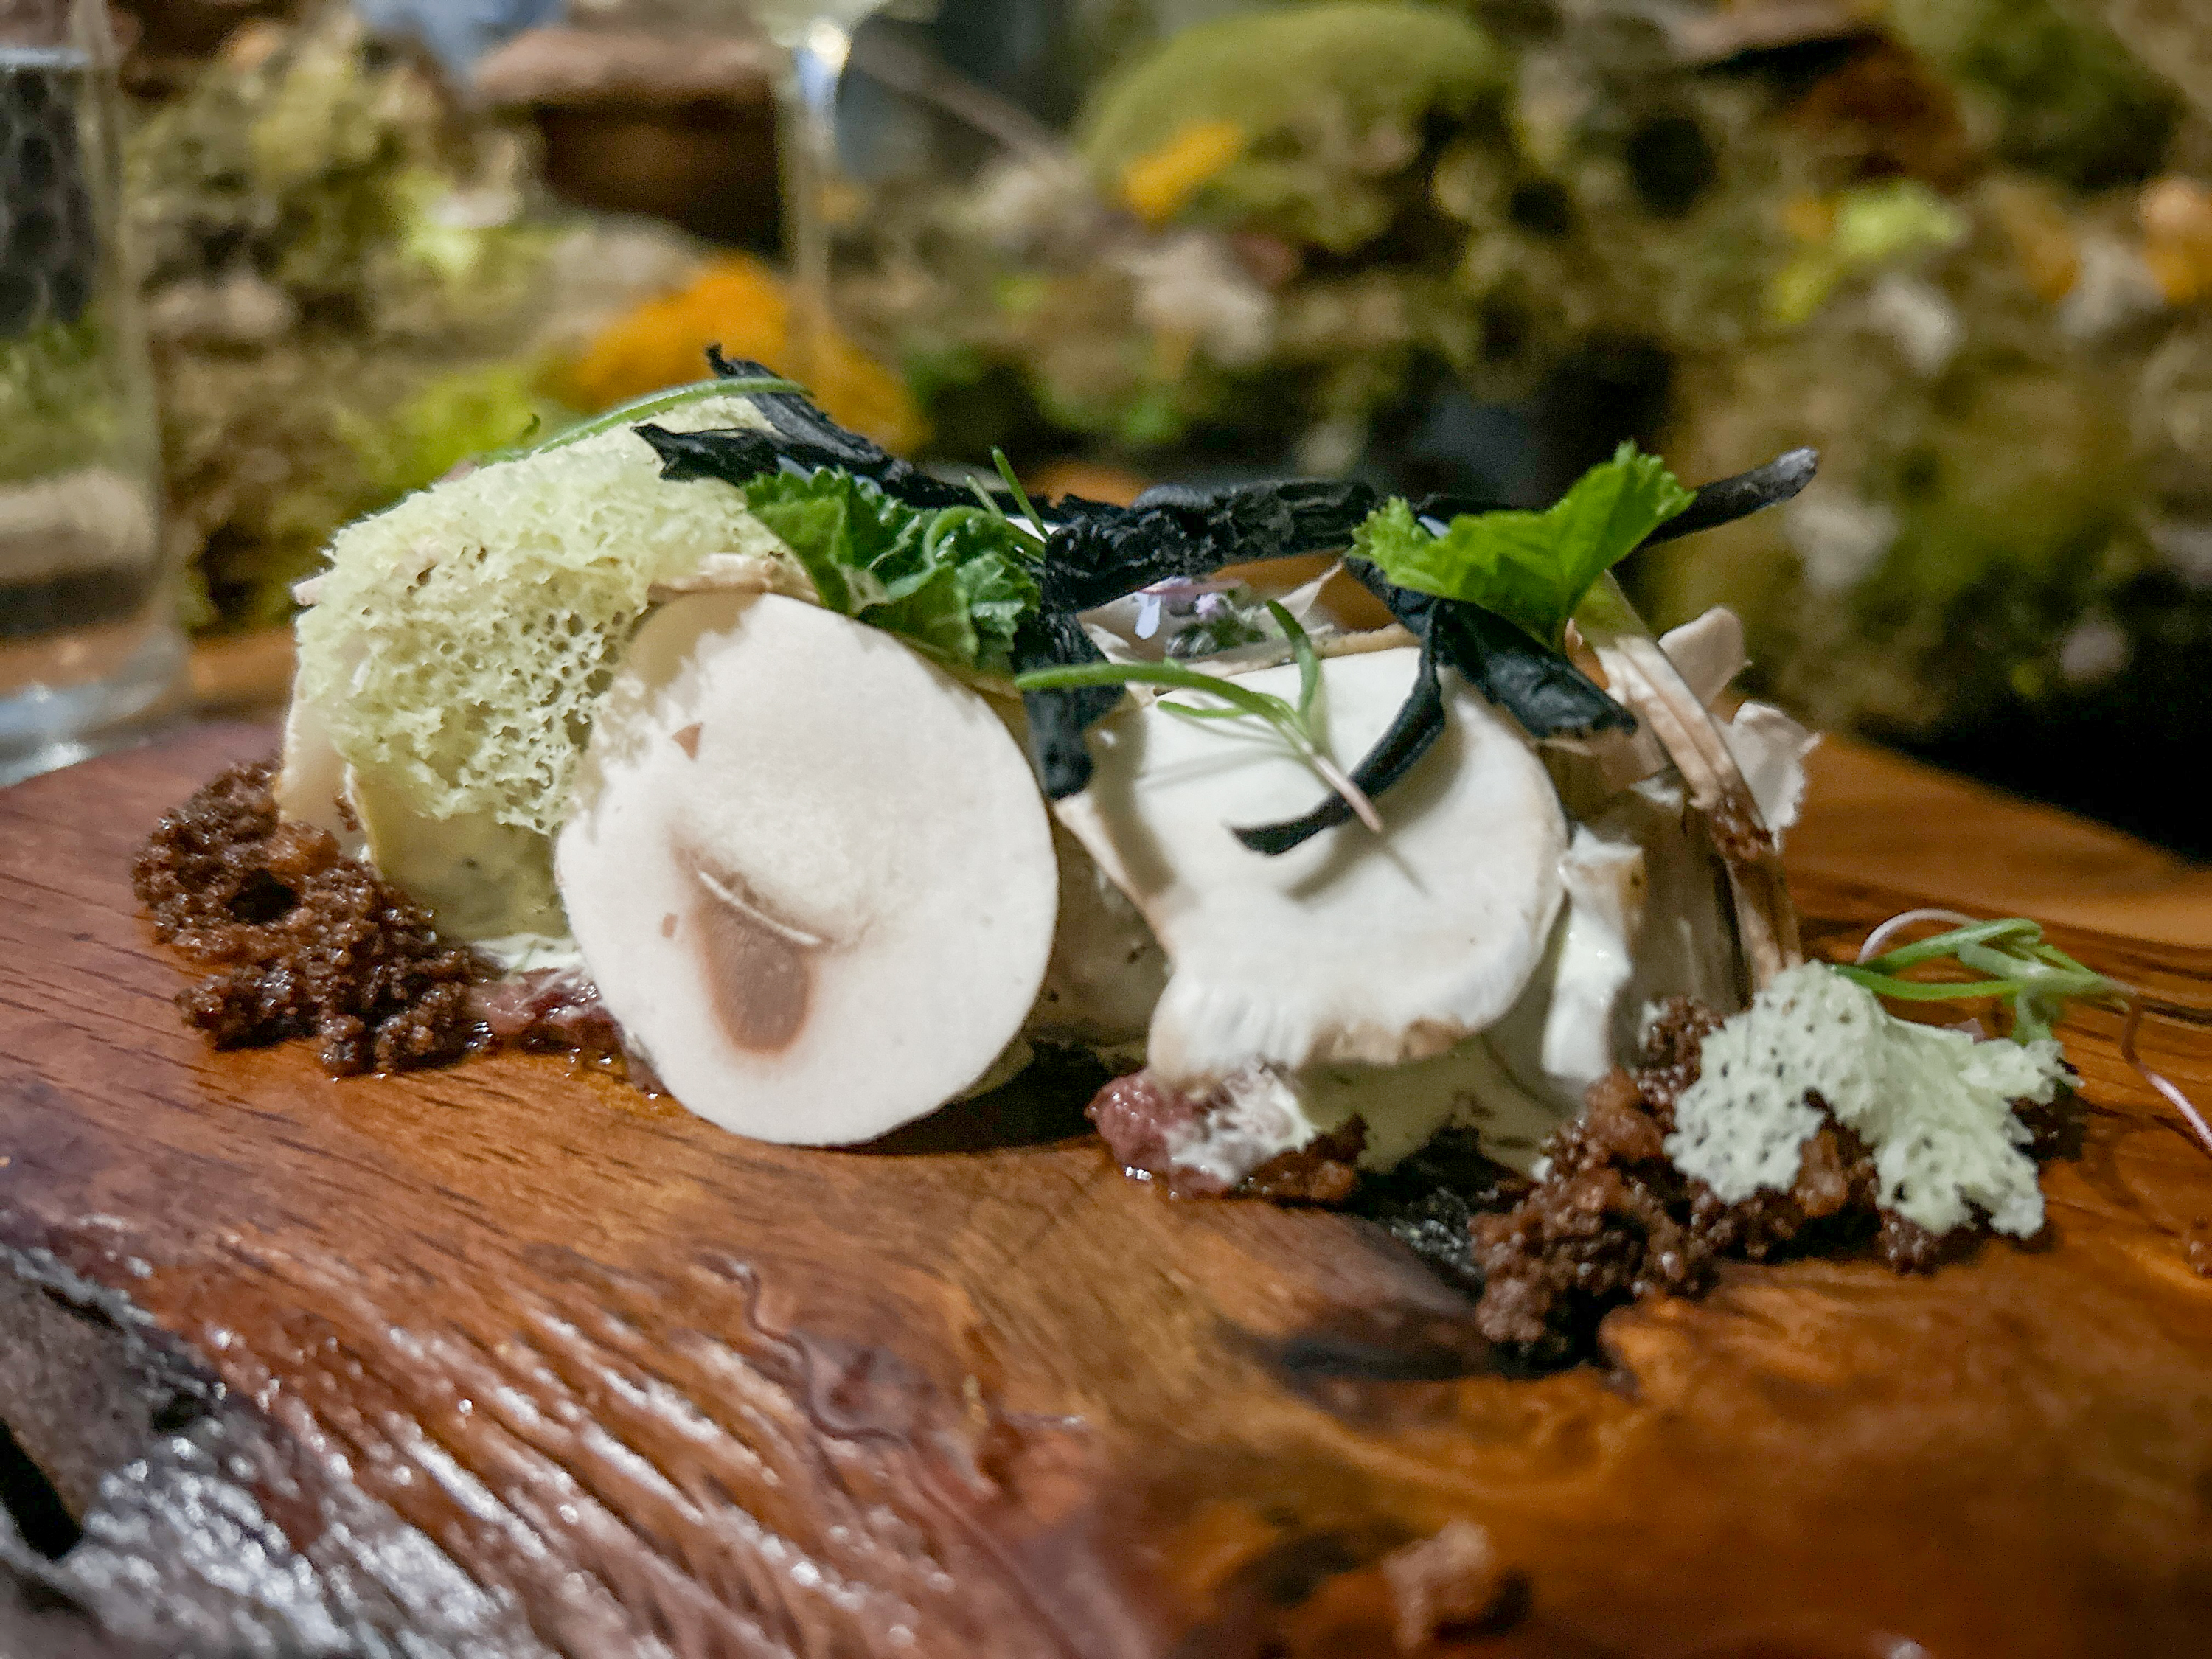 Gourmet dish with mushrooms, foam, herbs on a wooden board.